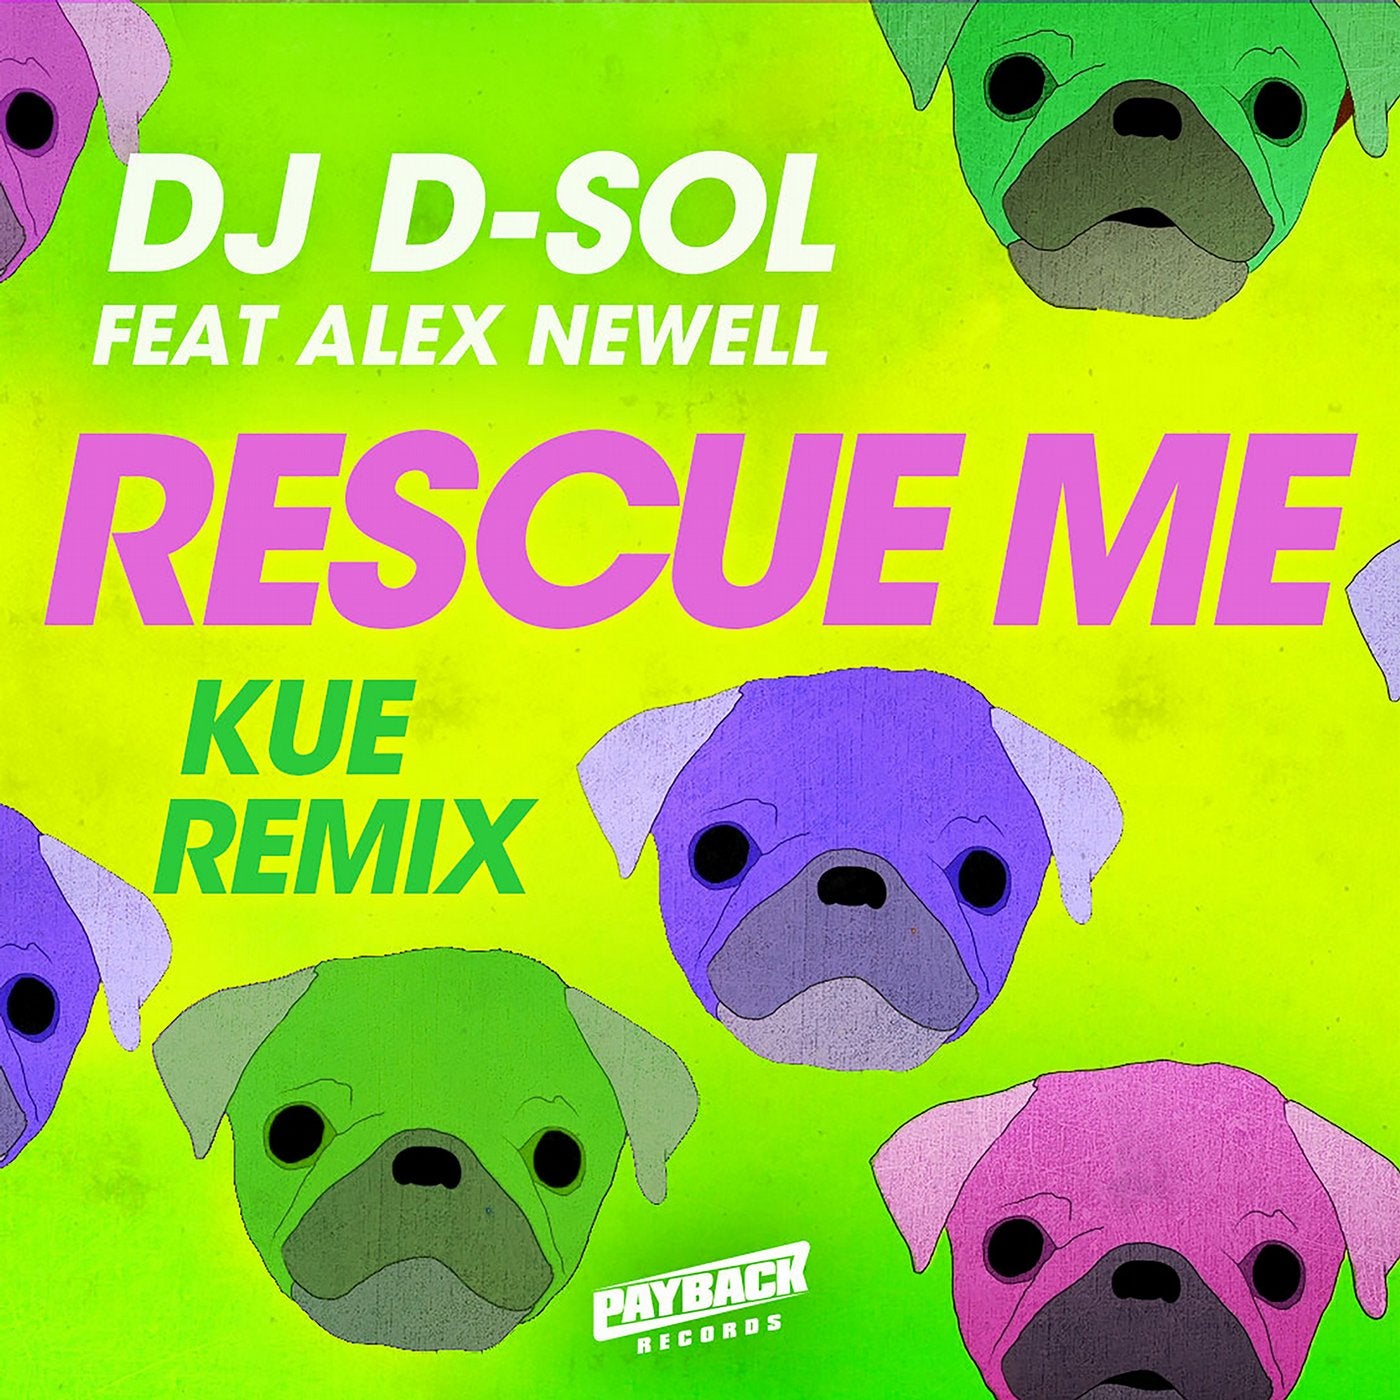 Rescue Me (feat. Alex Newell) [Kue Extended Remix]